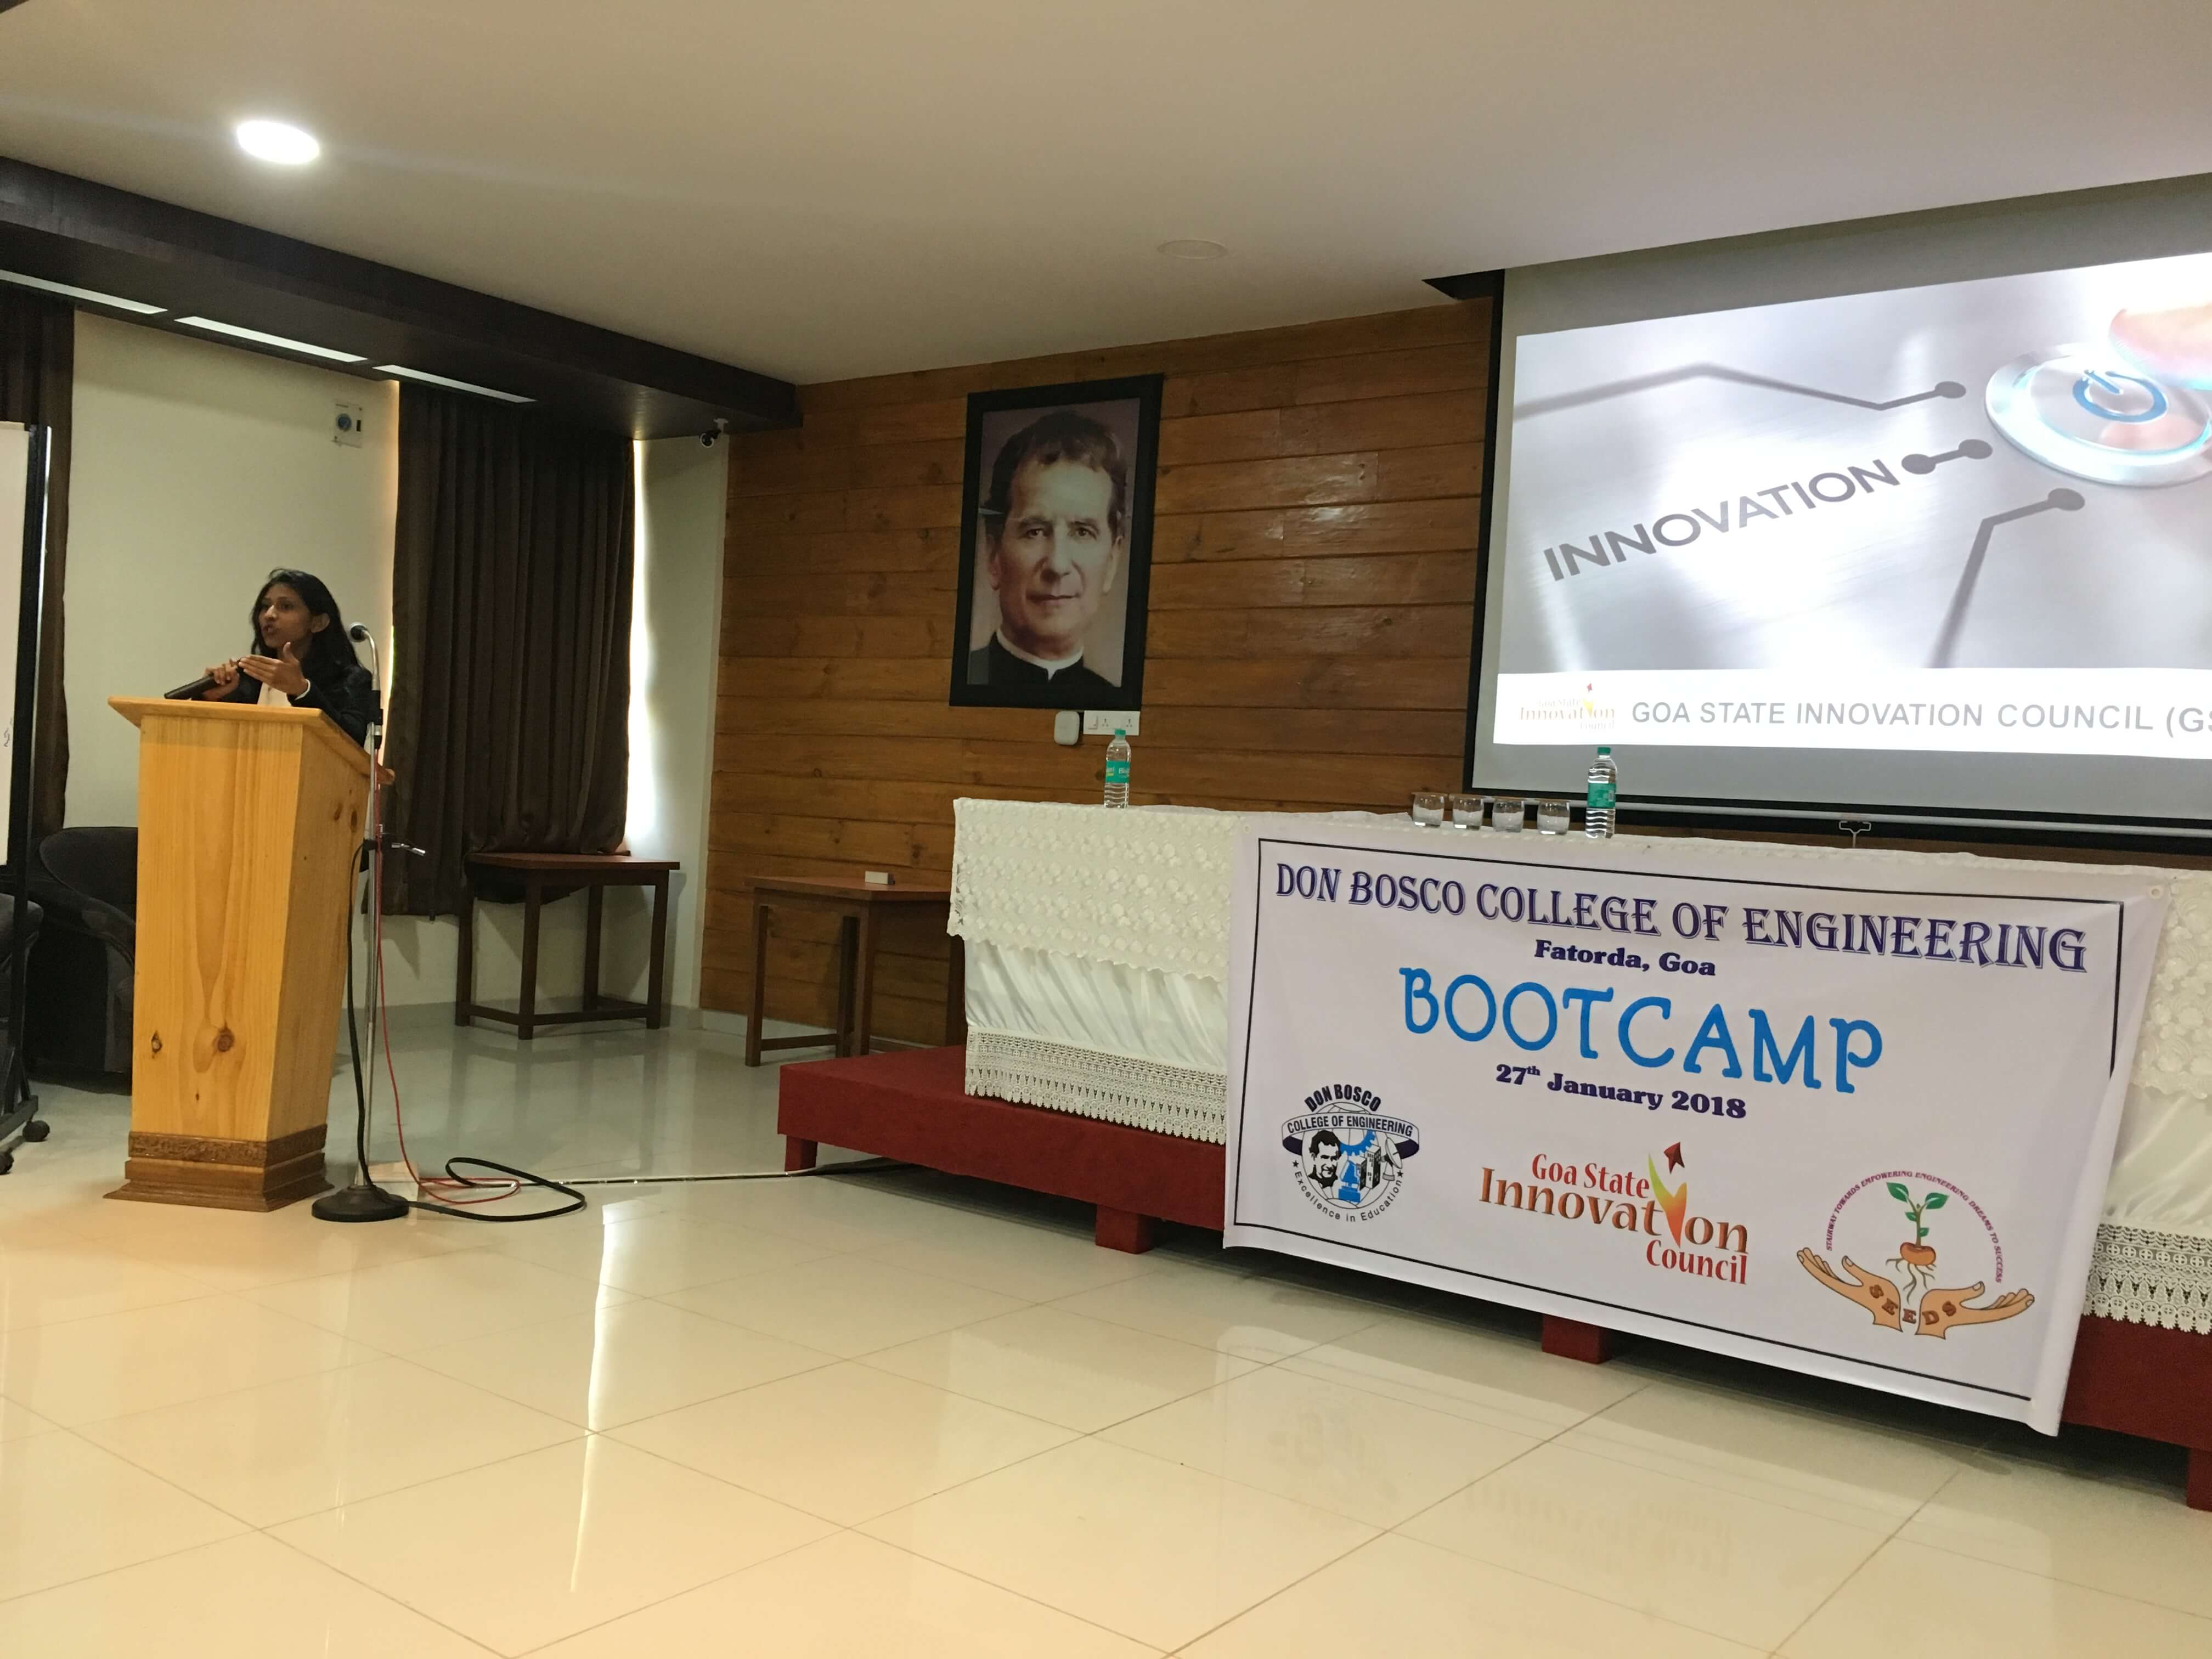 Bootcamp at Don Bosco College of Engineering